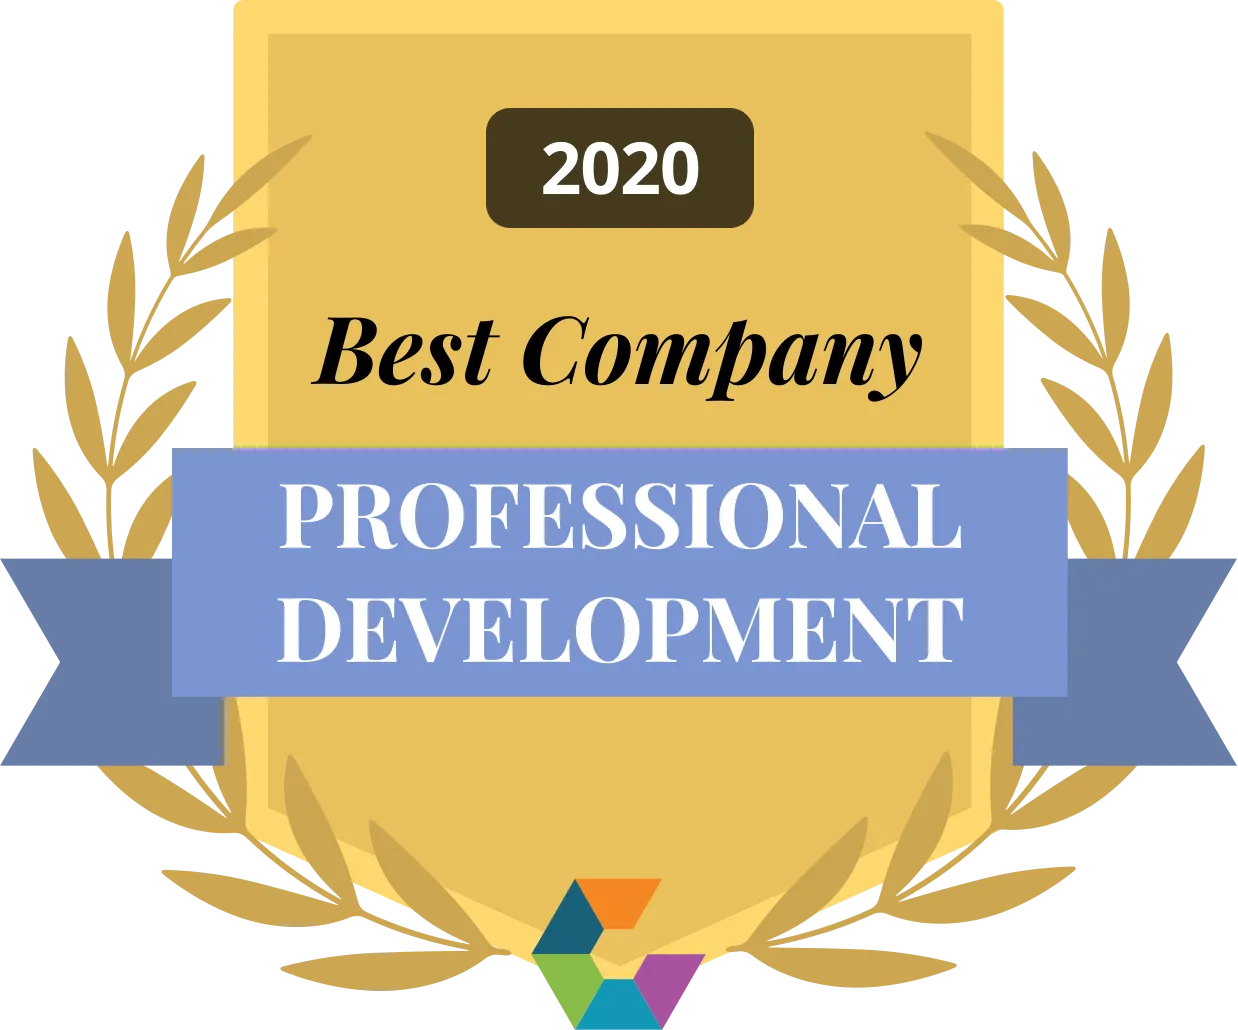 Comparably- Best Company Professional Development 2020